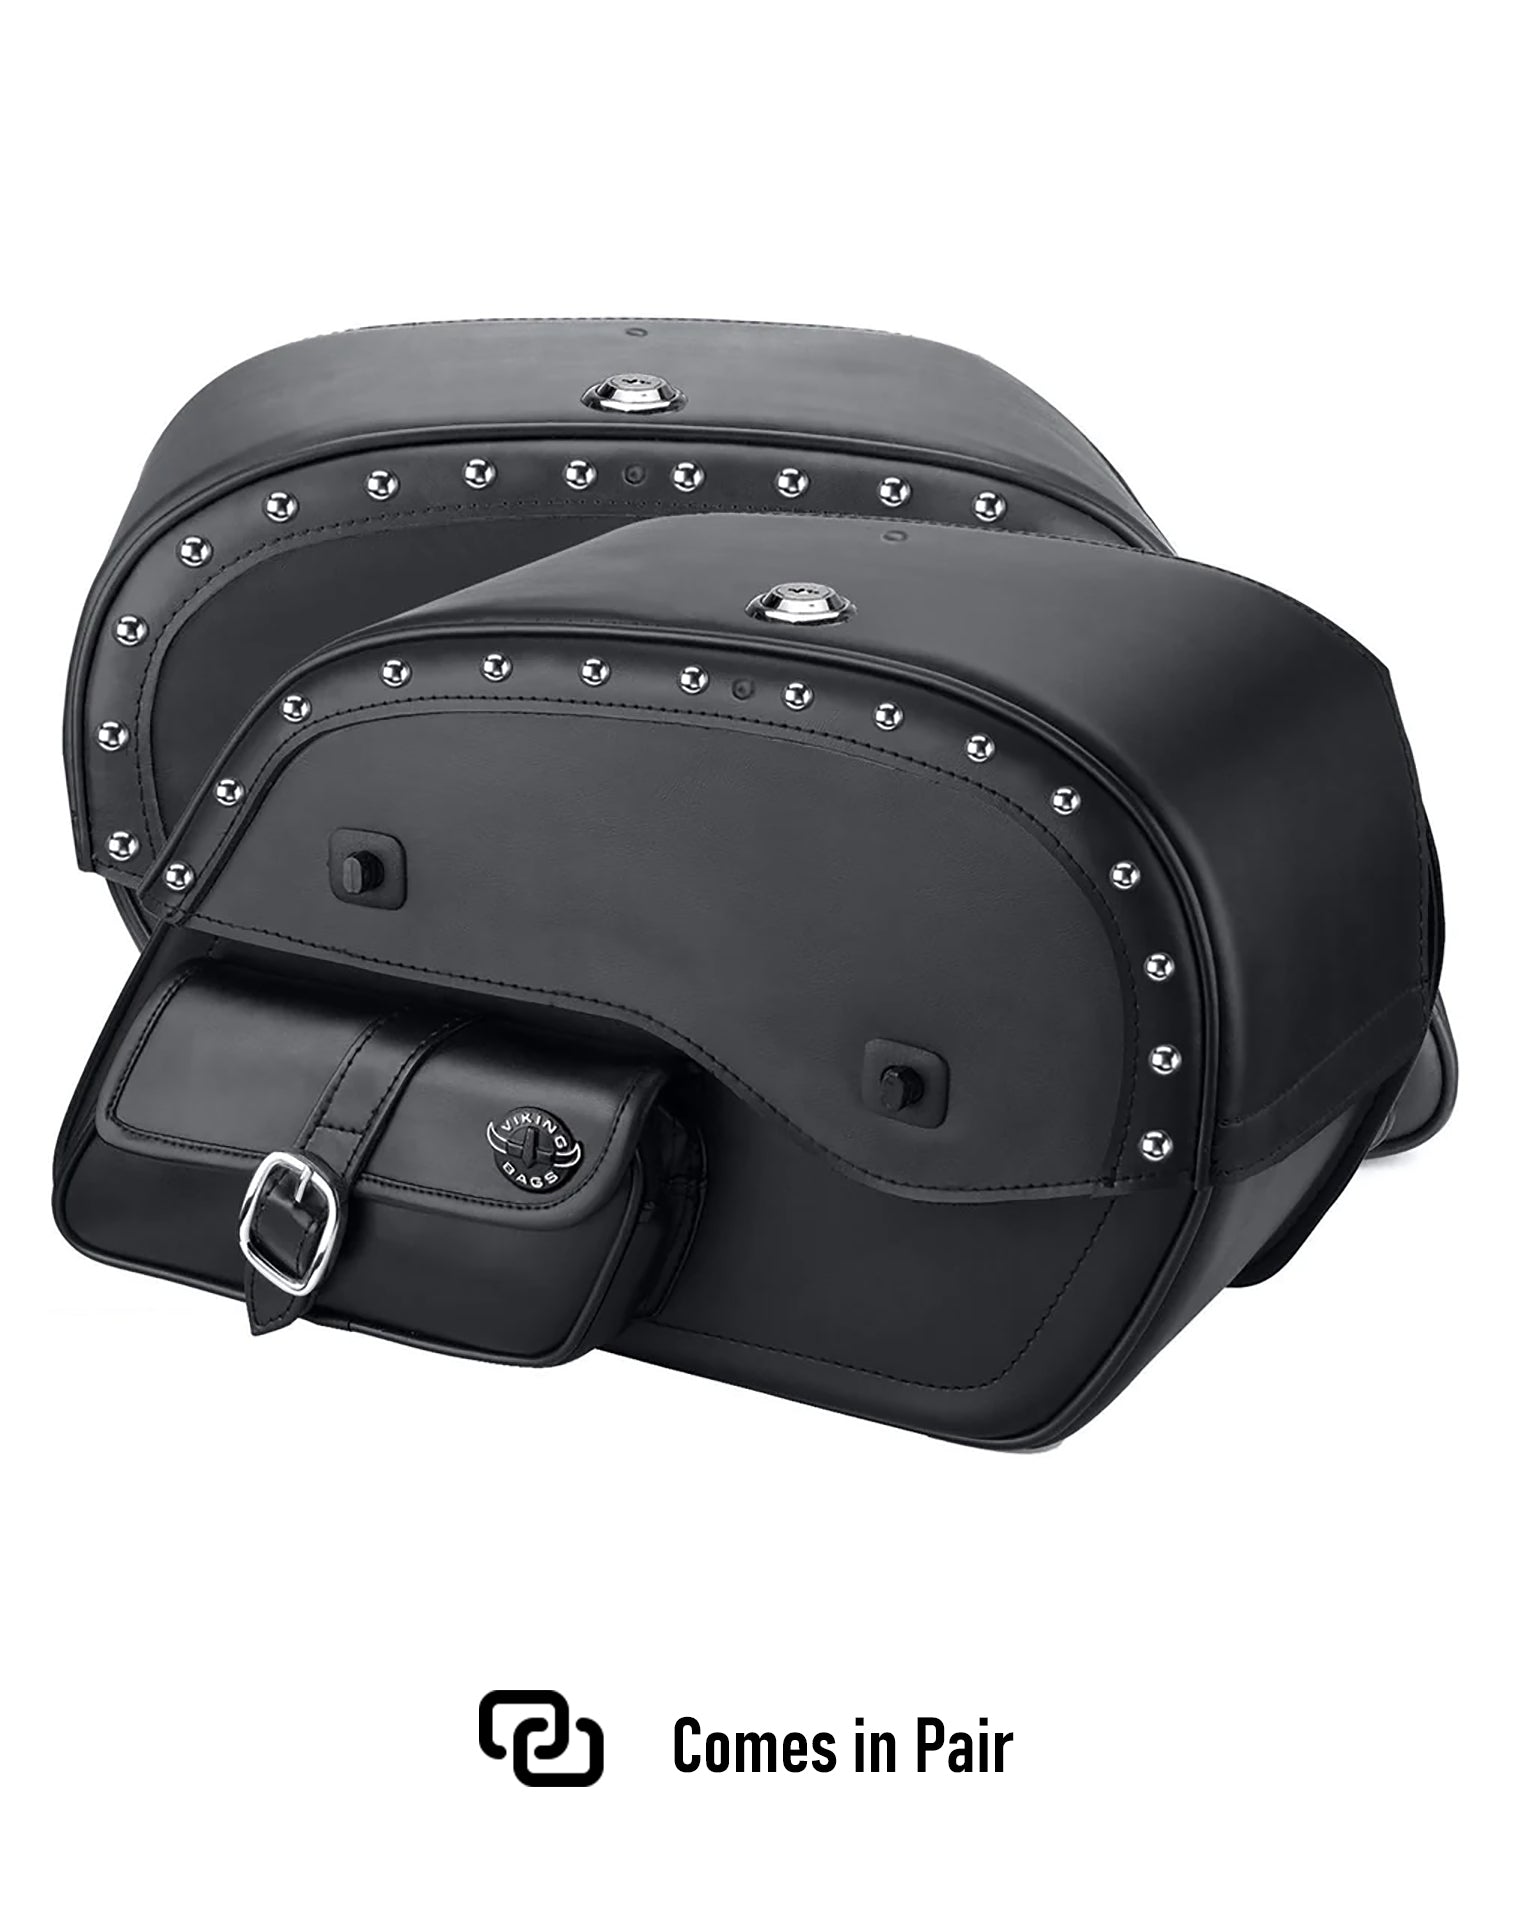 Viking Side Pocket Large Studded Yamaha V Star 1100 Classic Xvs11A Leather Motorcycle Saddlebags Comes in Pair